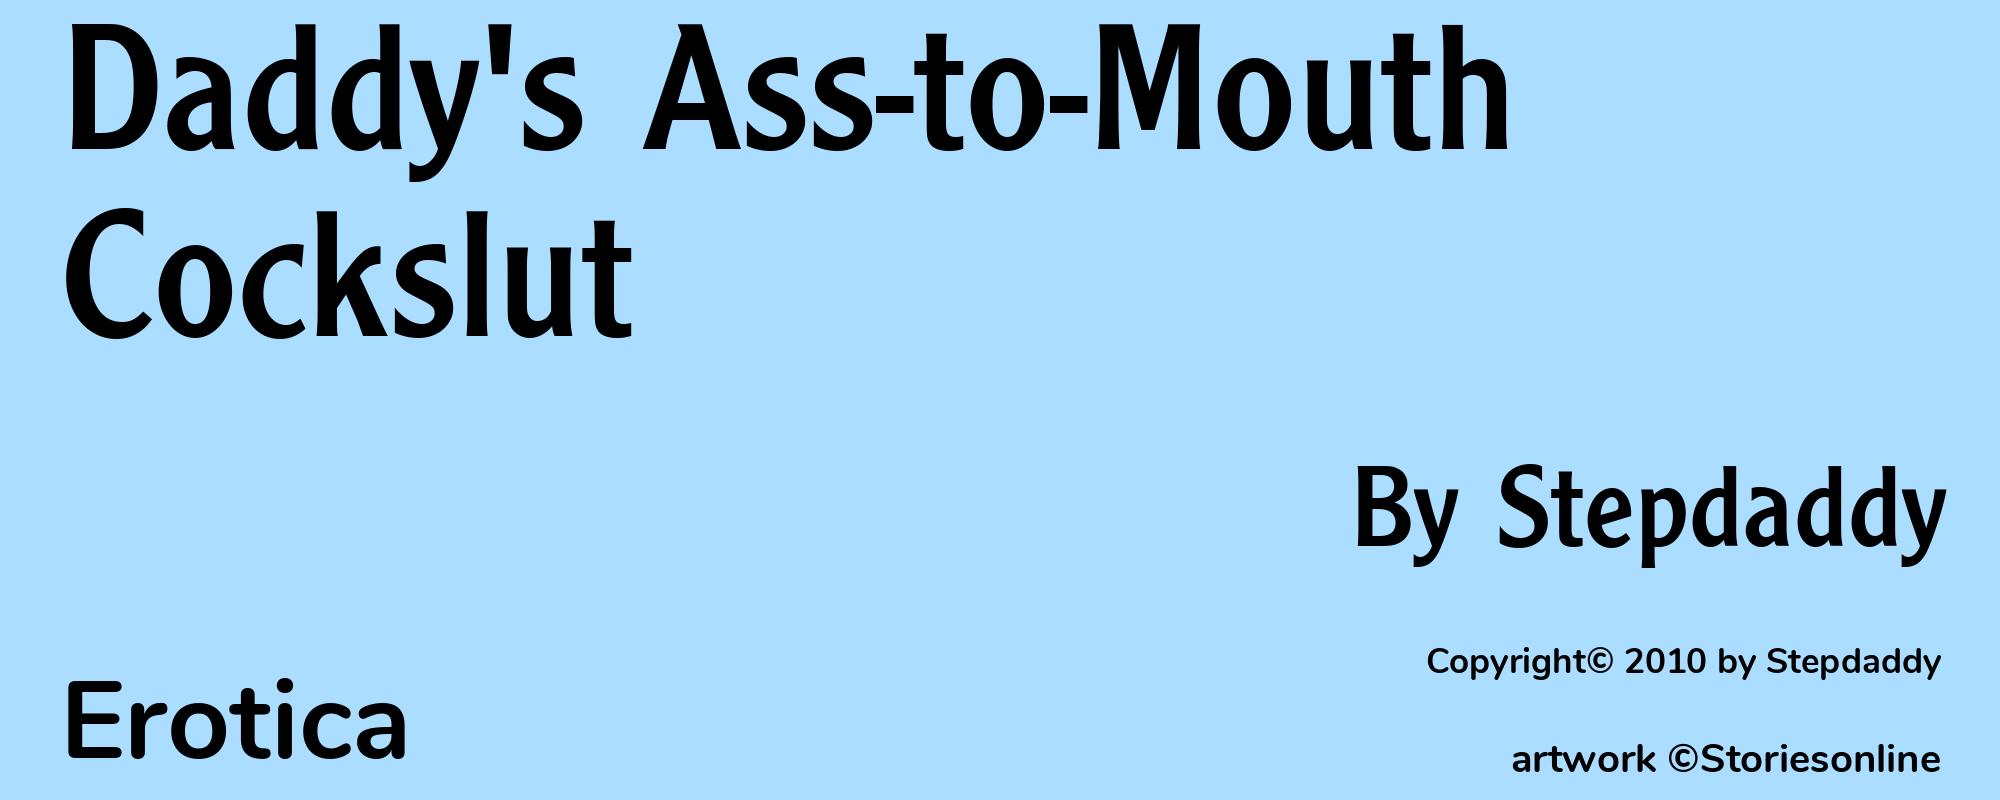 Daddy's Ass-to-Mouth Cockslut - Cover